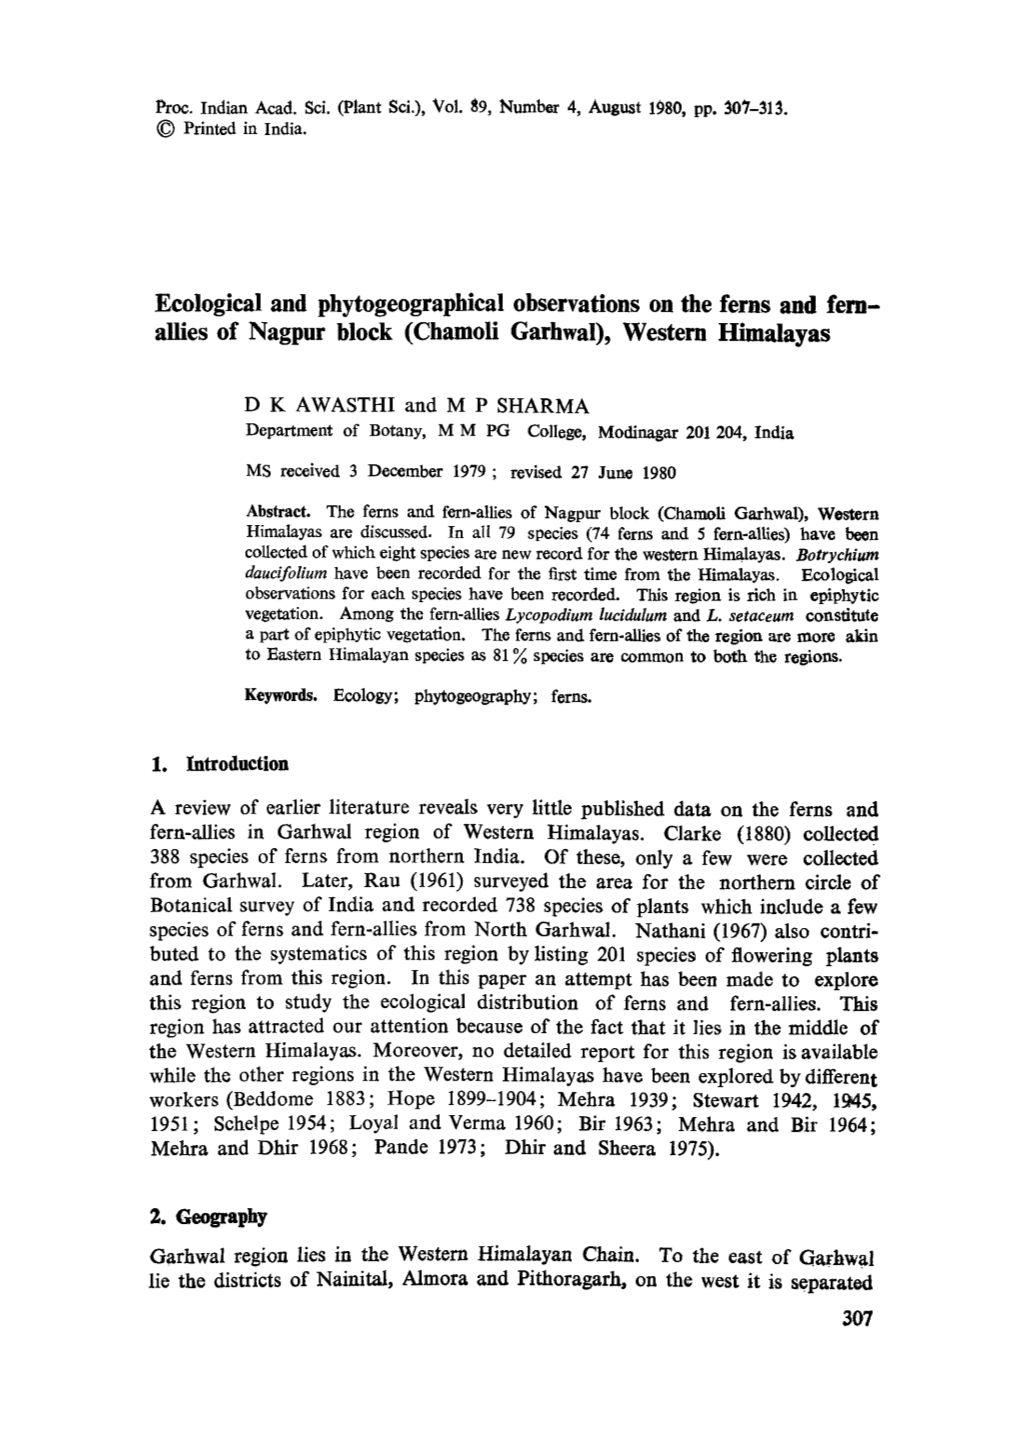 Ecological and Phytogeographical Observations on the Ferns and Fernallies of Nagpur Block (Chamoli Garhwal), Western Himalayas